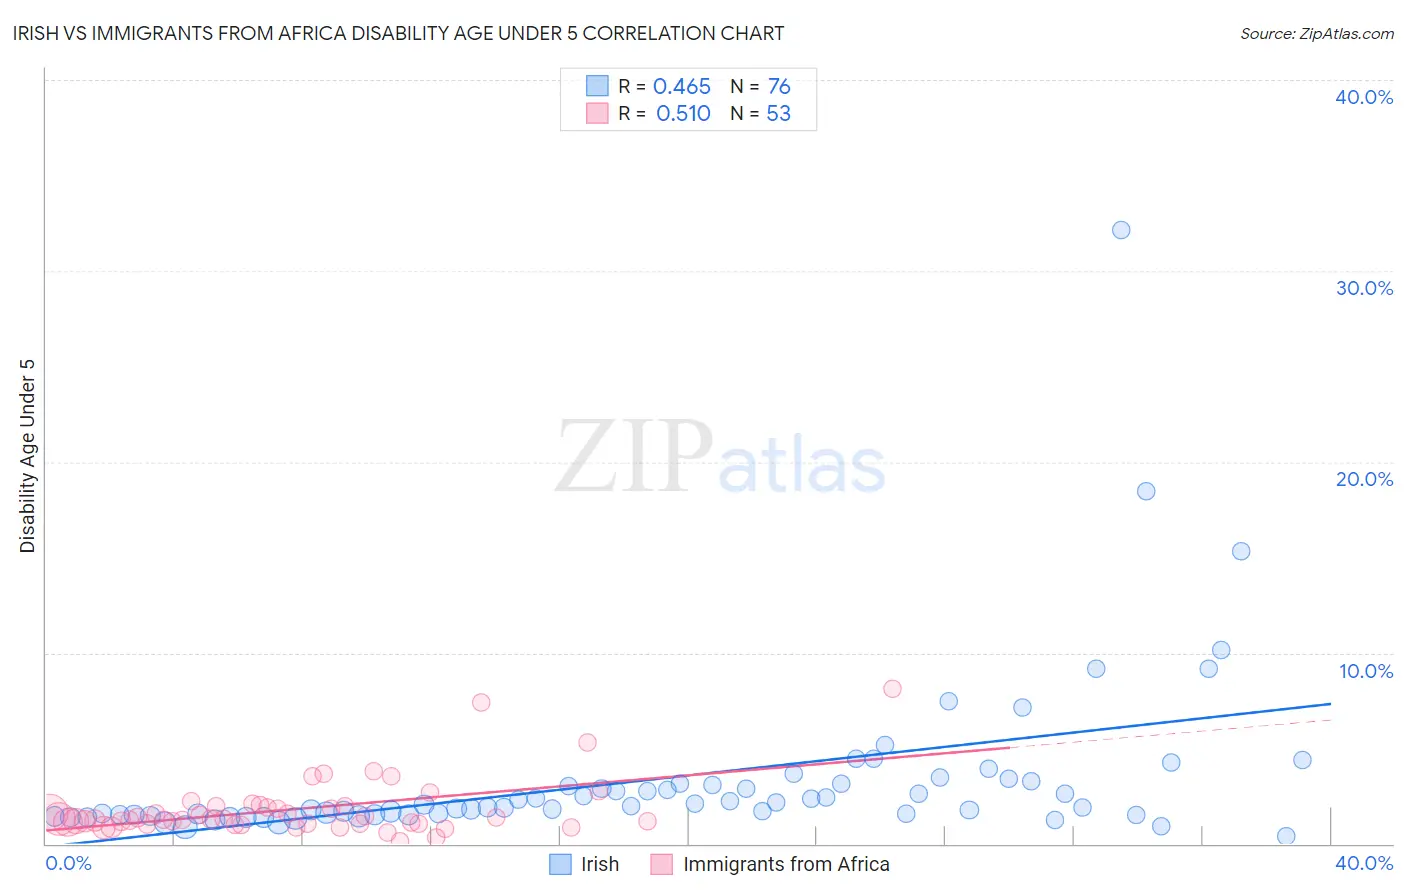 Irish vs Immigrants from Africa Disability Age Under 5